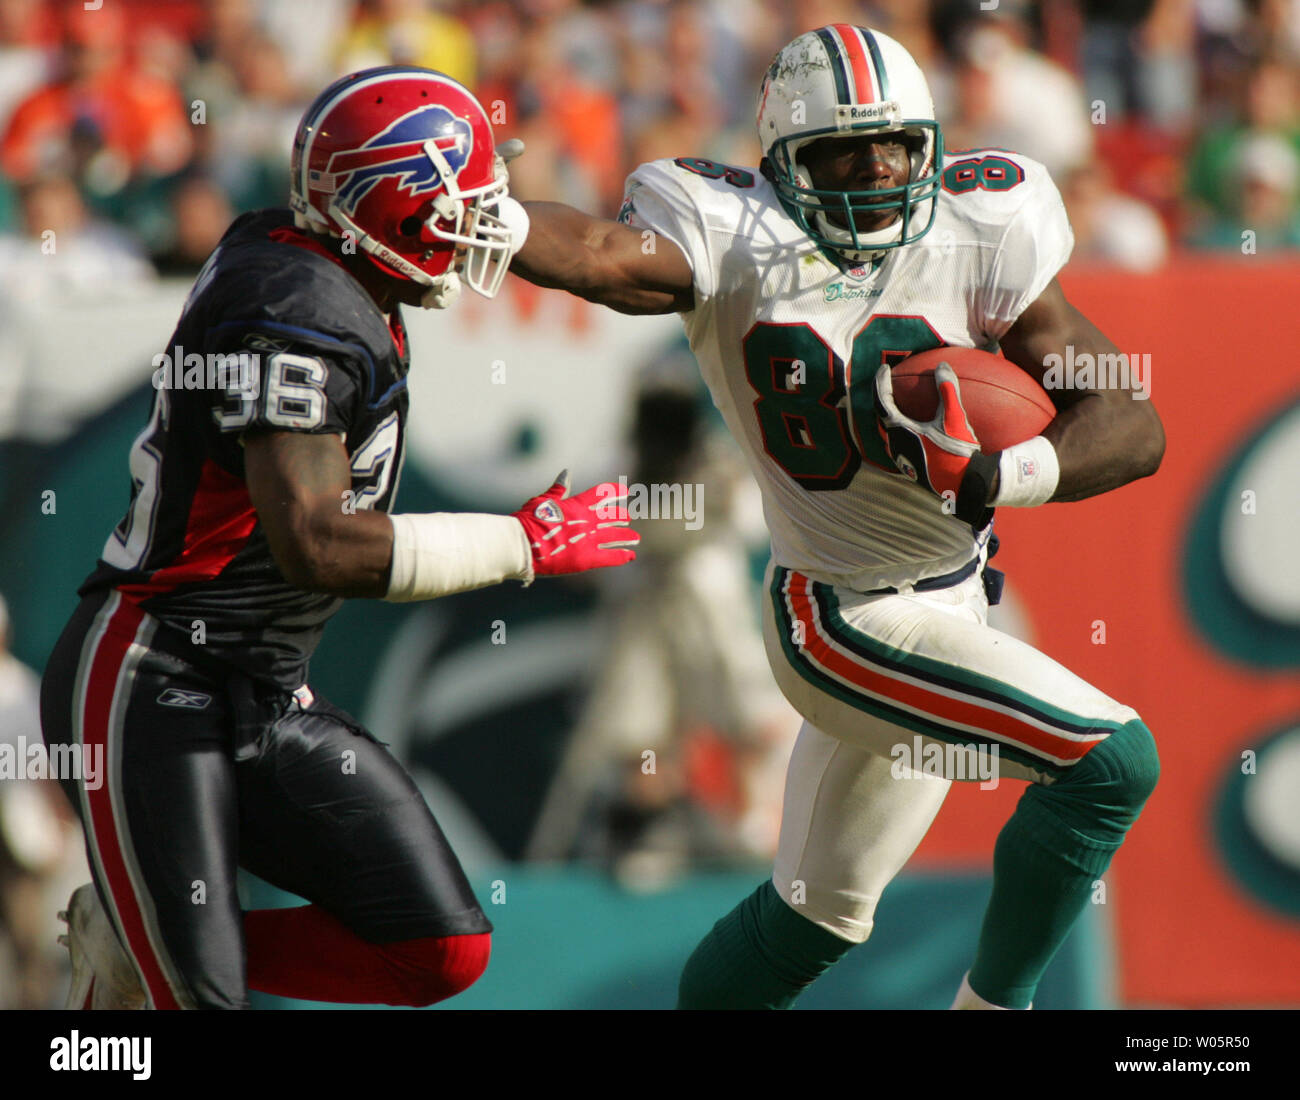 Miami Dolphins wide receiver Marty Booker (86) gains yardage